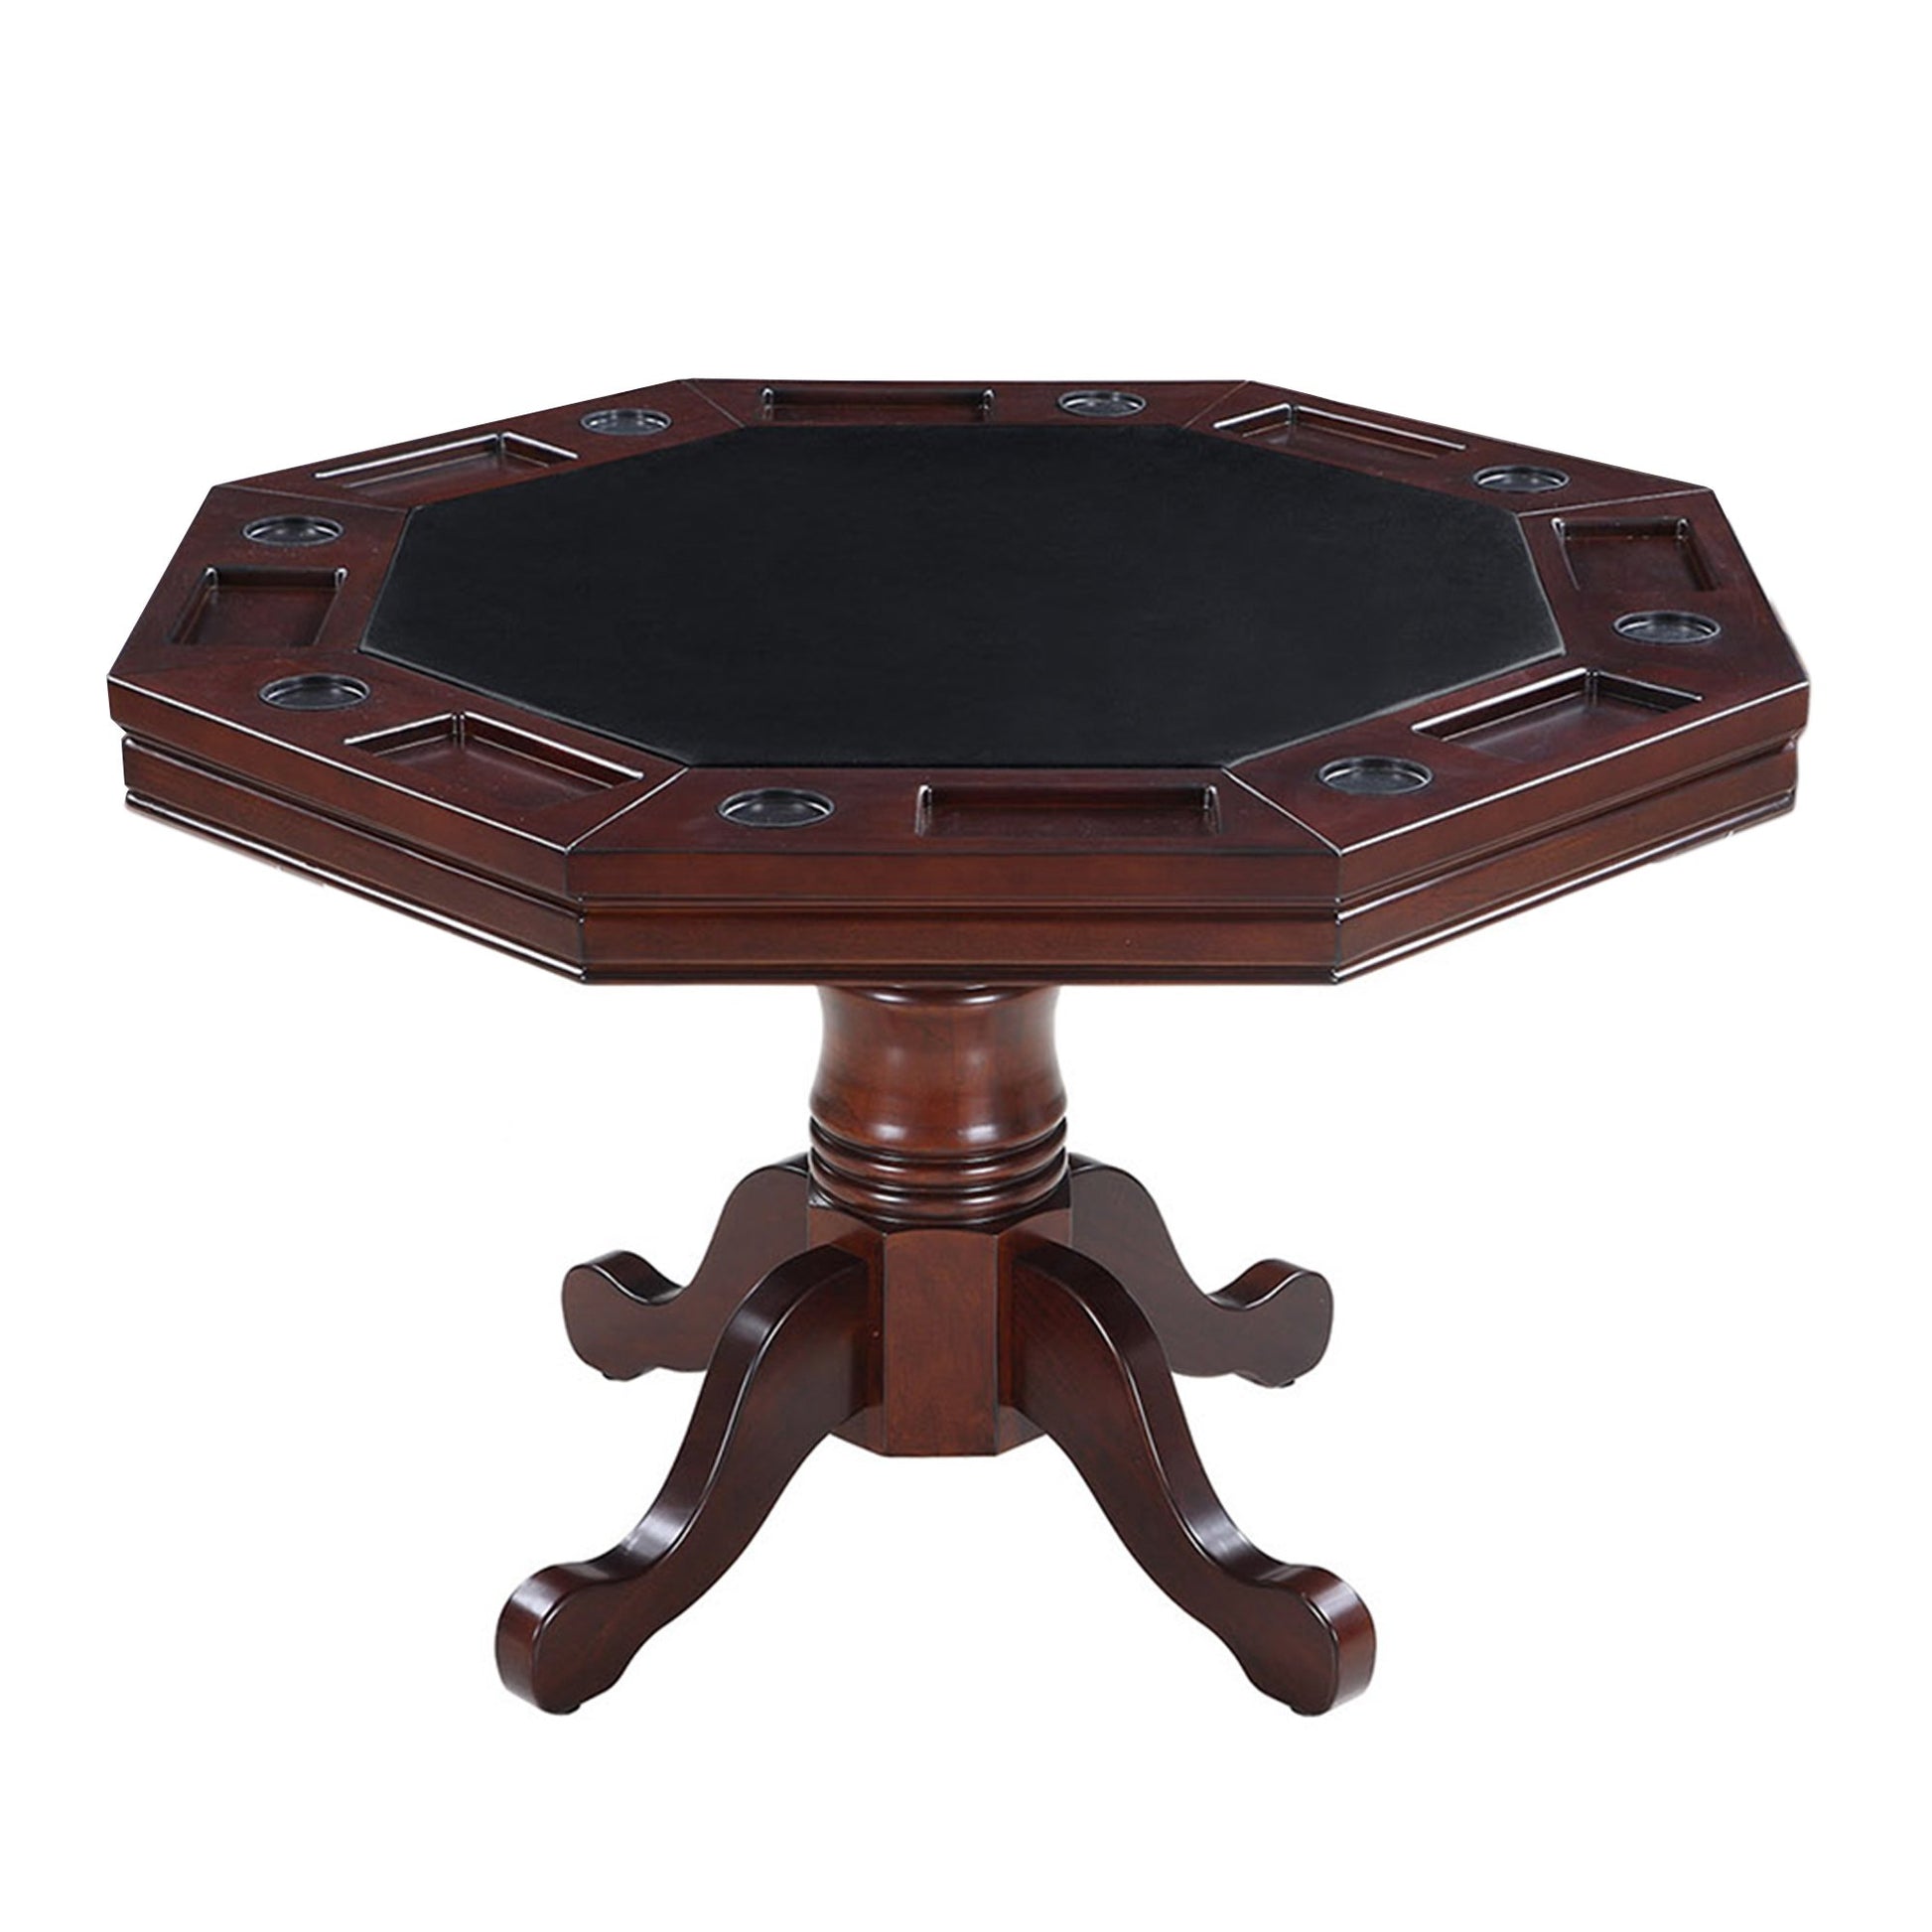 Hathaway Kingston Walnut 3 in 1 Poker Table Set with 4 Arm Chairs - Gaming Blaze